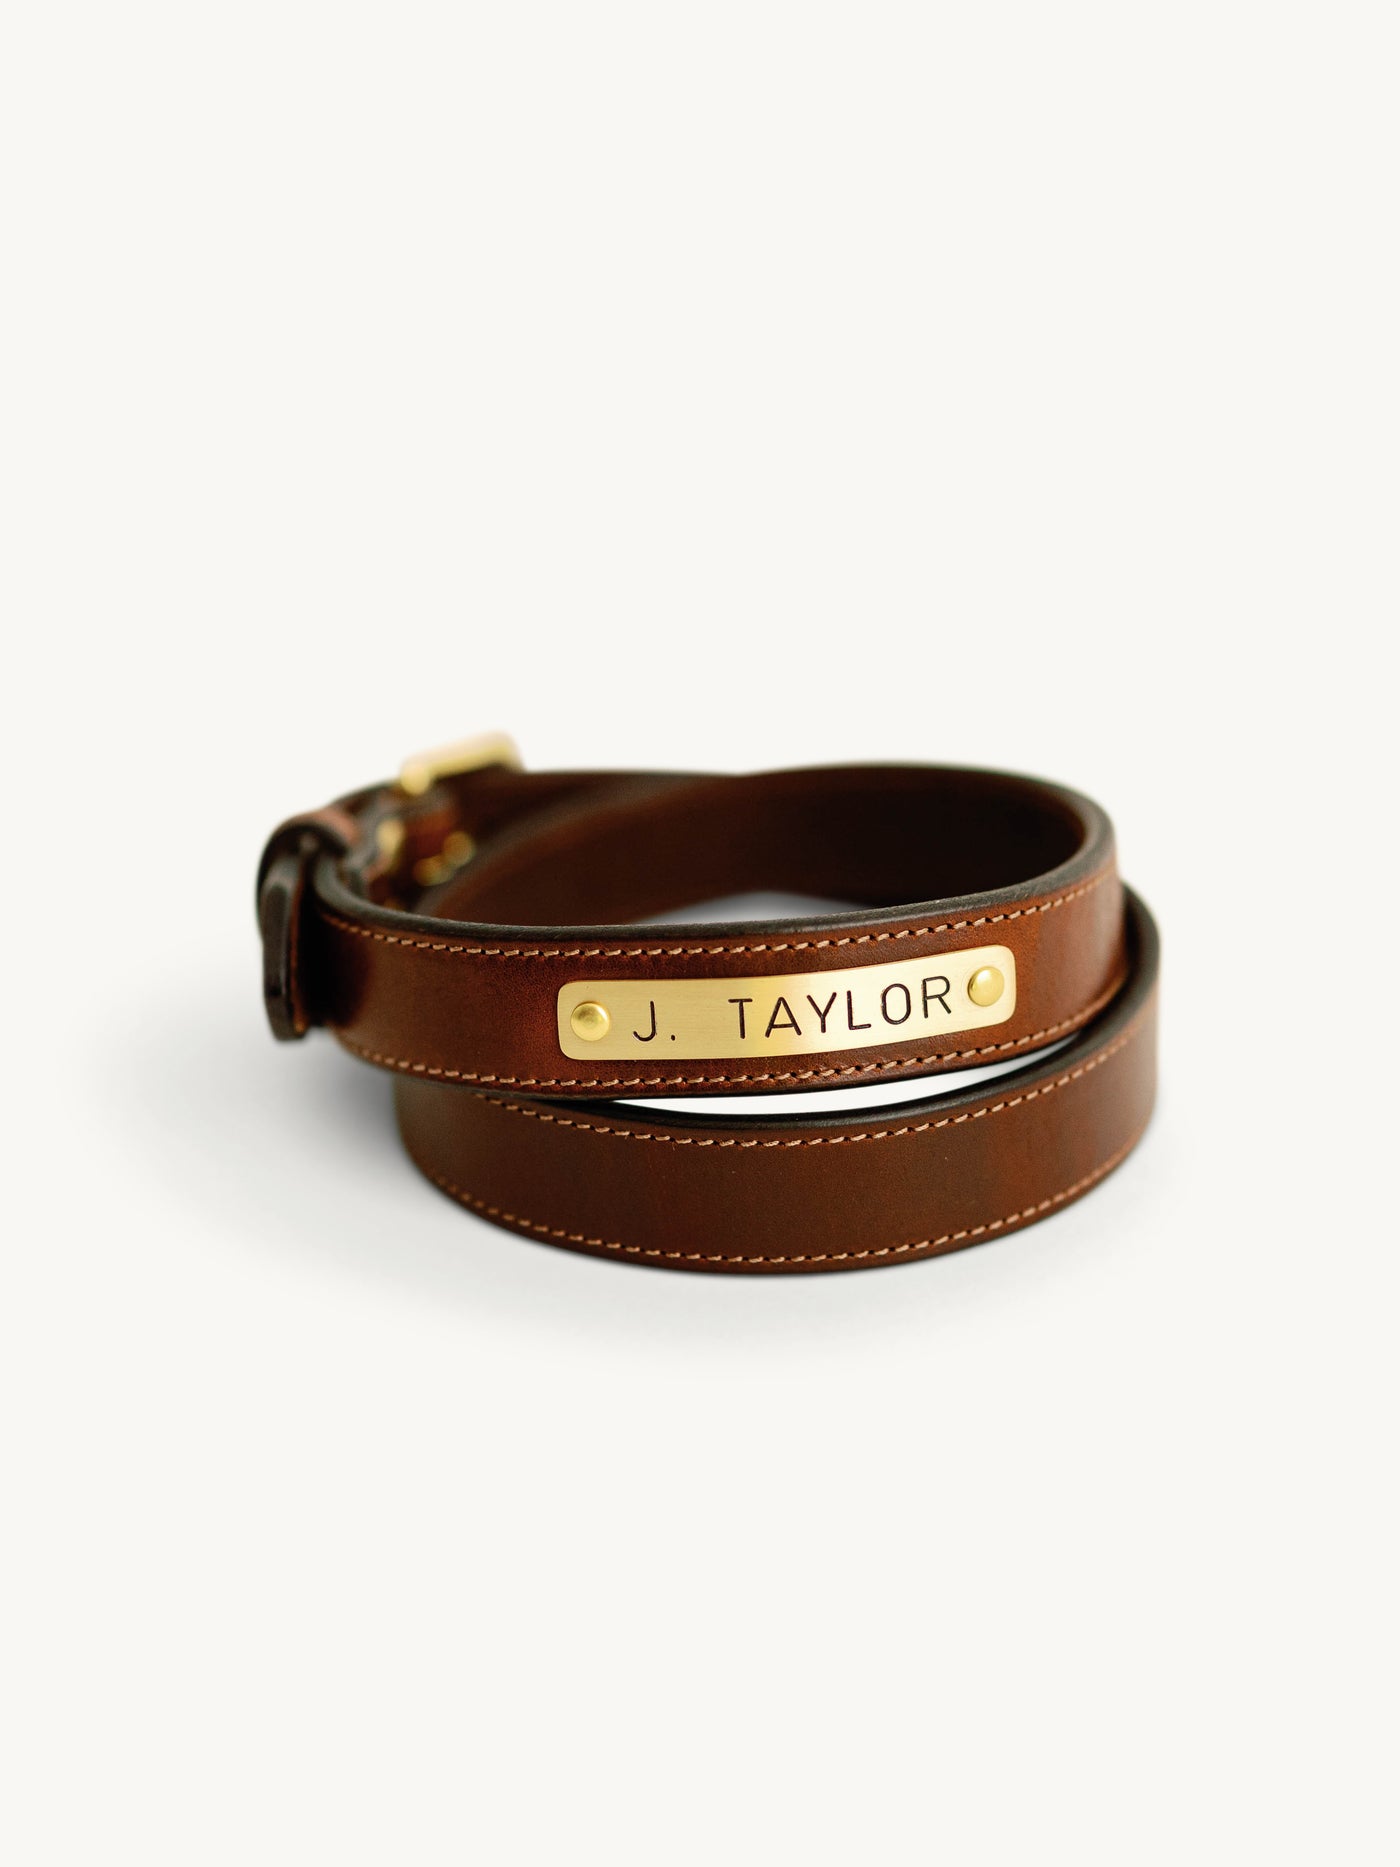 Leather Belts Personalized with Your Name, Handmade Leather Belts